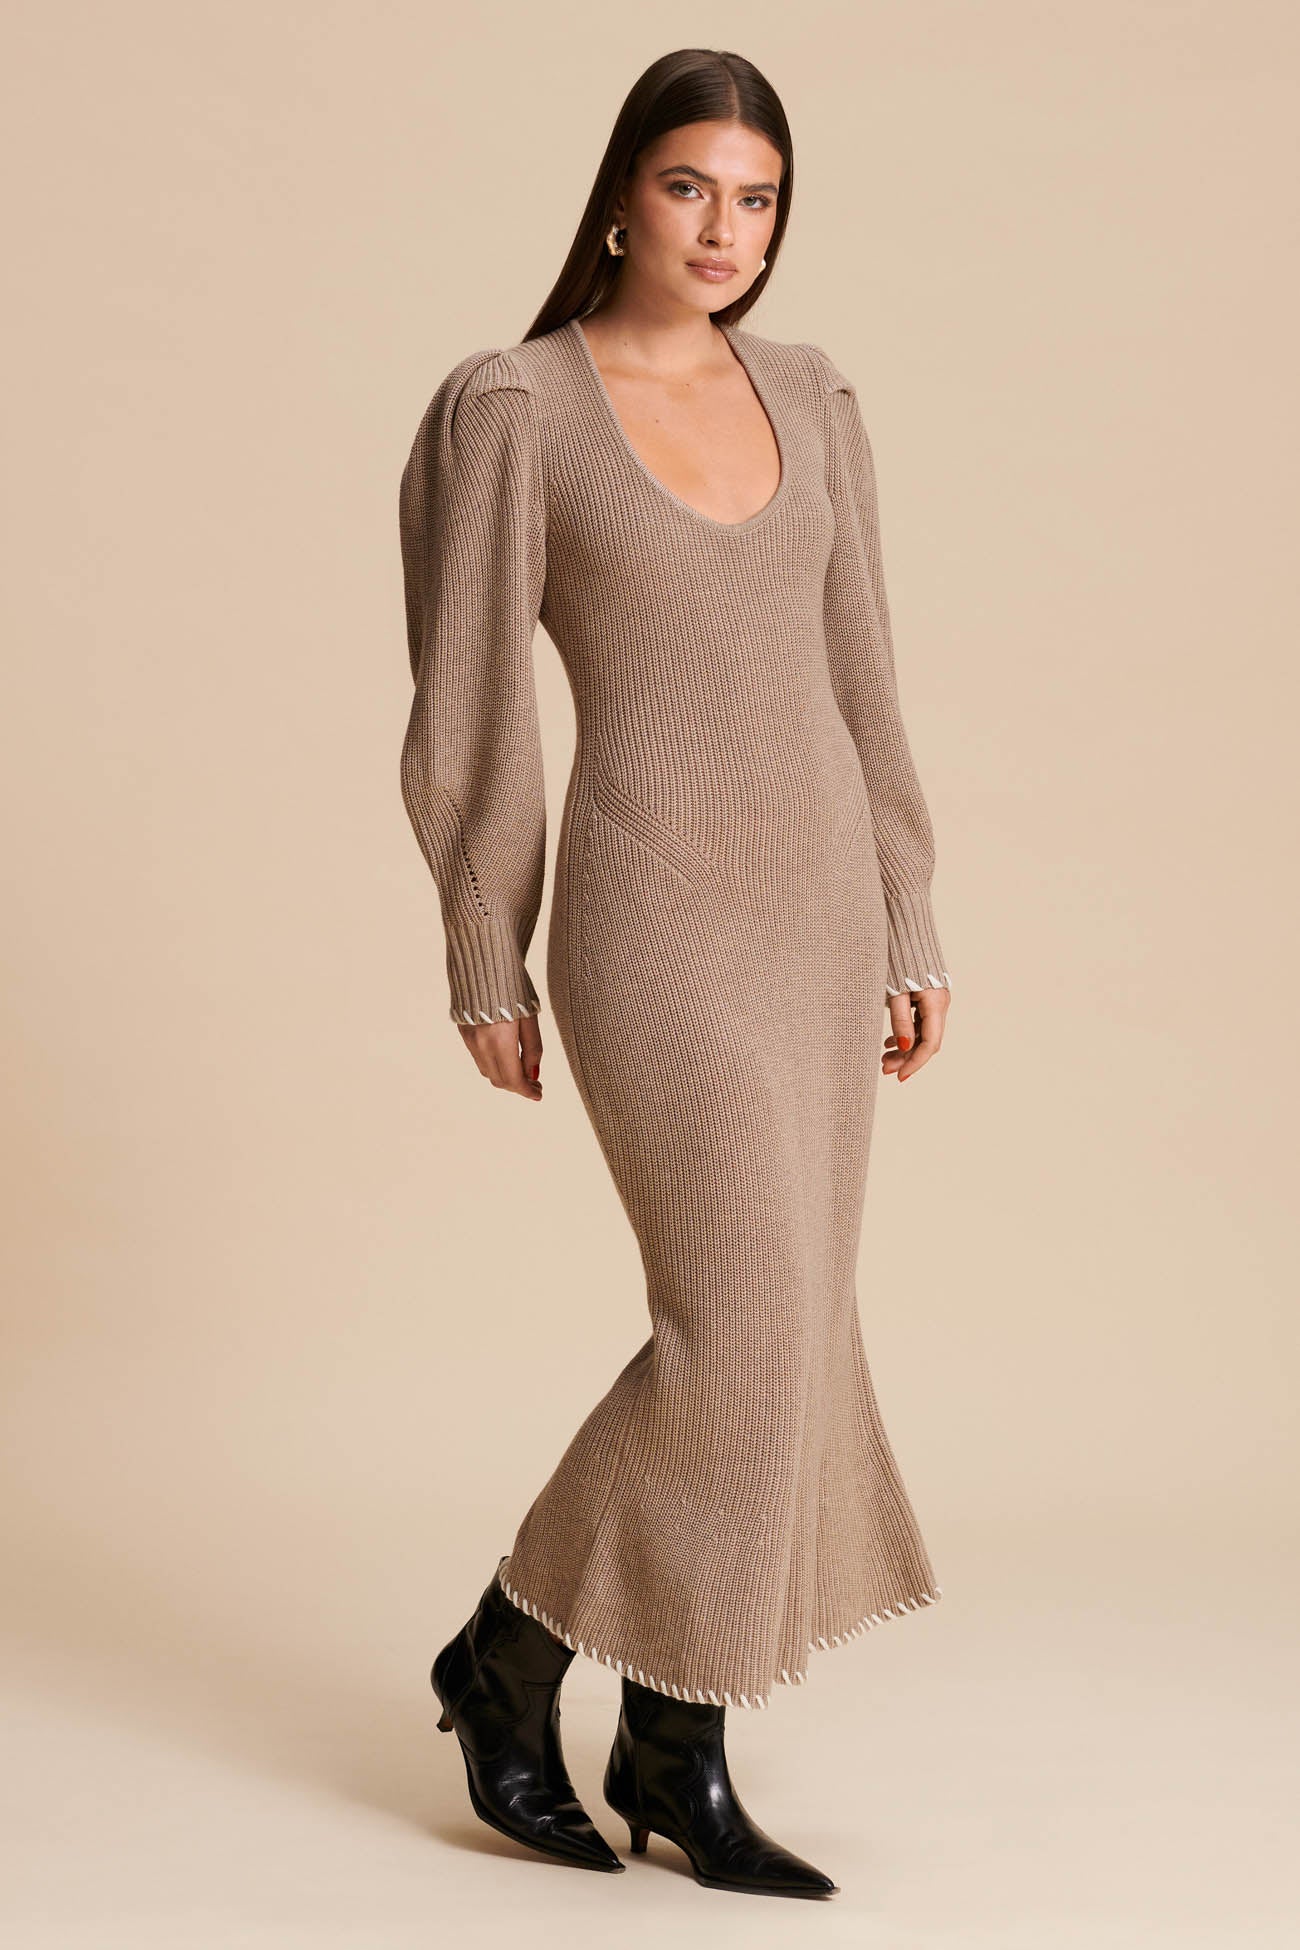 Knitted. Midi dress. Long dress. Visible stitches at the bust. Knitted. Beige. Puffy Arms. Knitted Dress. image